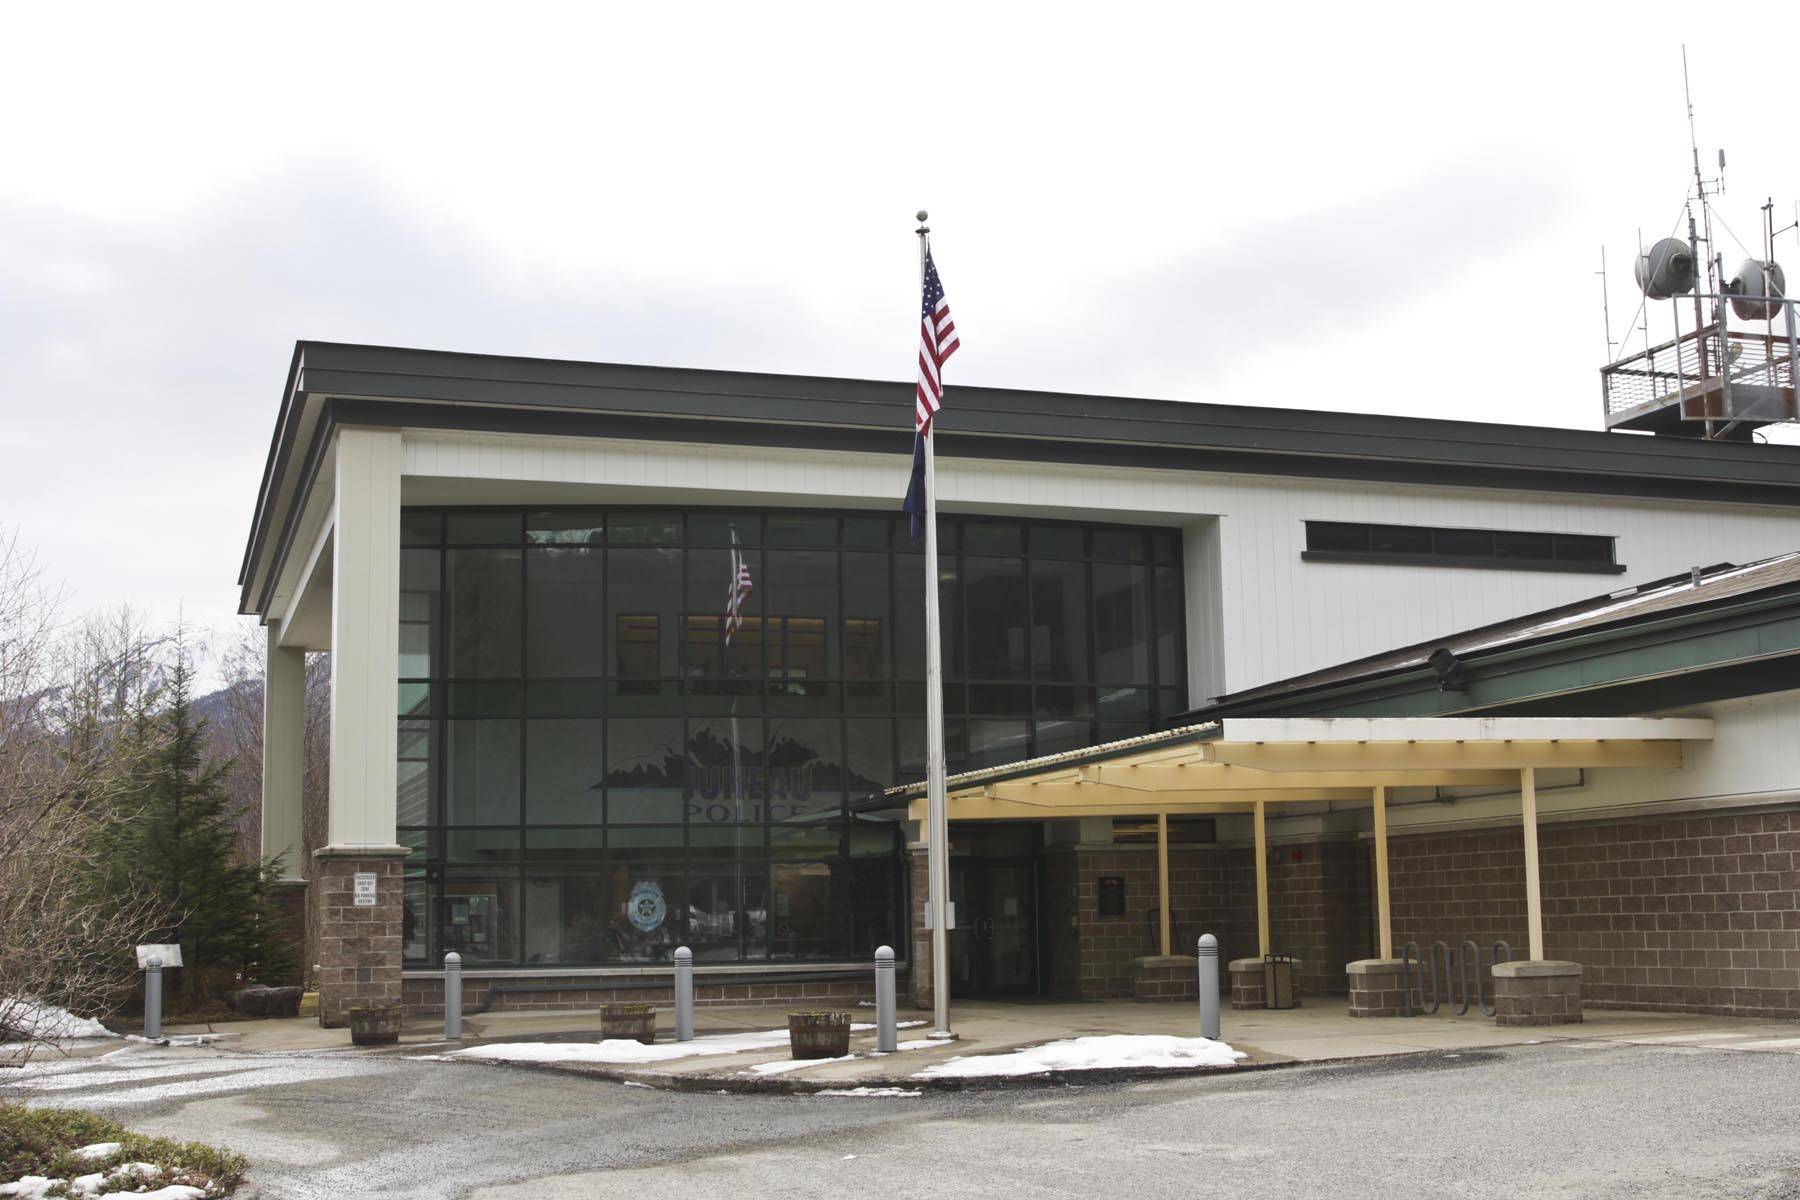 The Juneau Police Department, seen here on March 20, 2020, will hold a Citizen’s Police Academy beginning this October. (Michael S. Lockett | Juneau Empire)